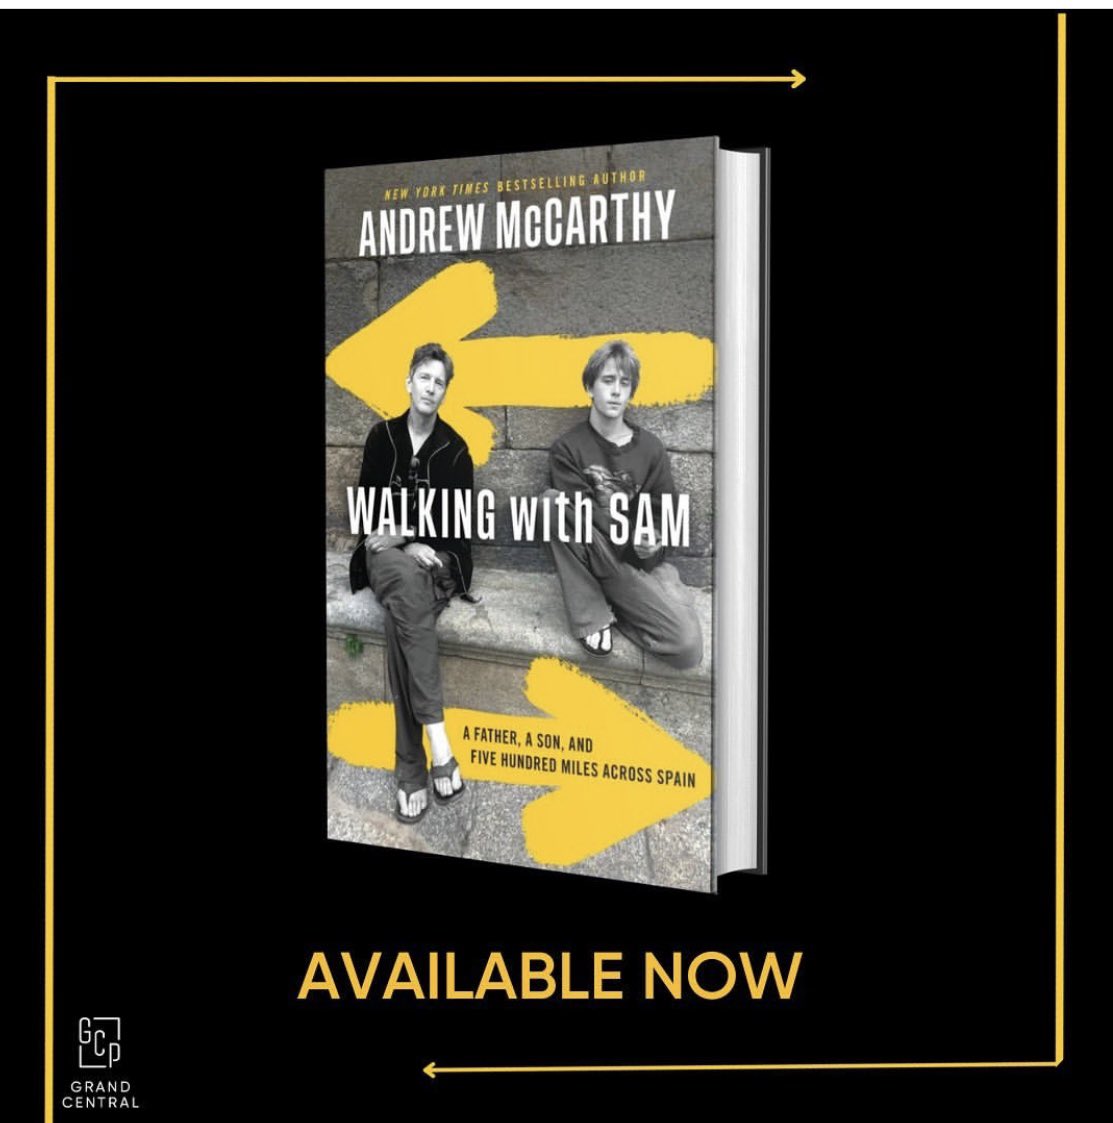 Today is publication day for my new book, WALKING WITH SAM: A father, a son, and 500 miles across Spain. It’s available at book stores and right here rb.gy/ukynjg/ Let me know what you think.